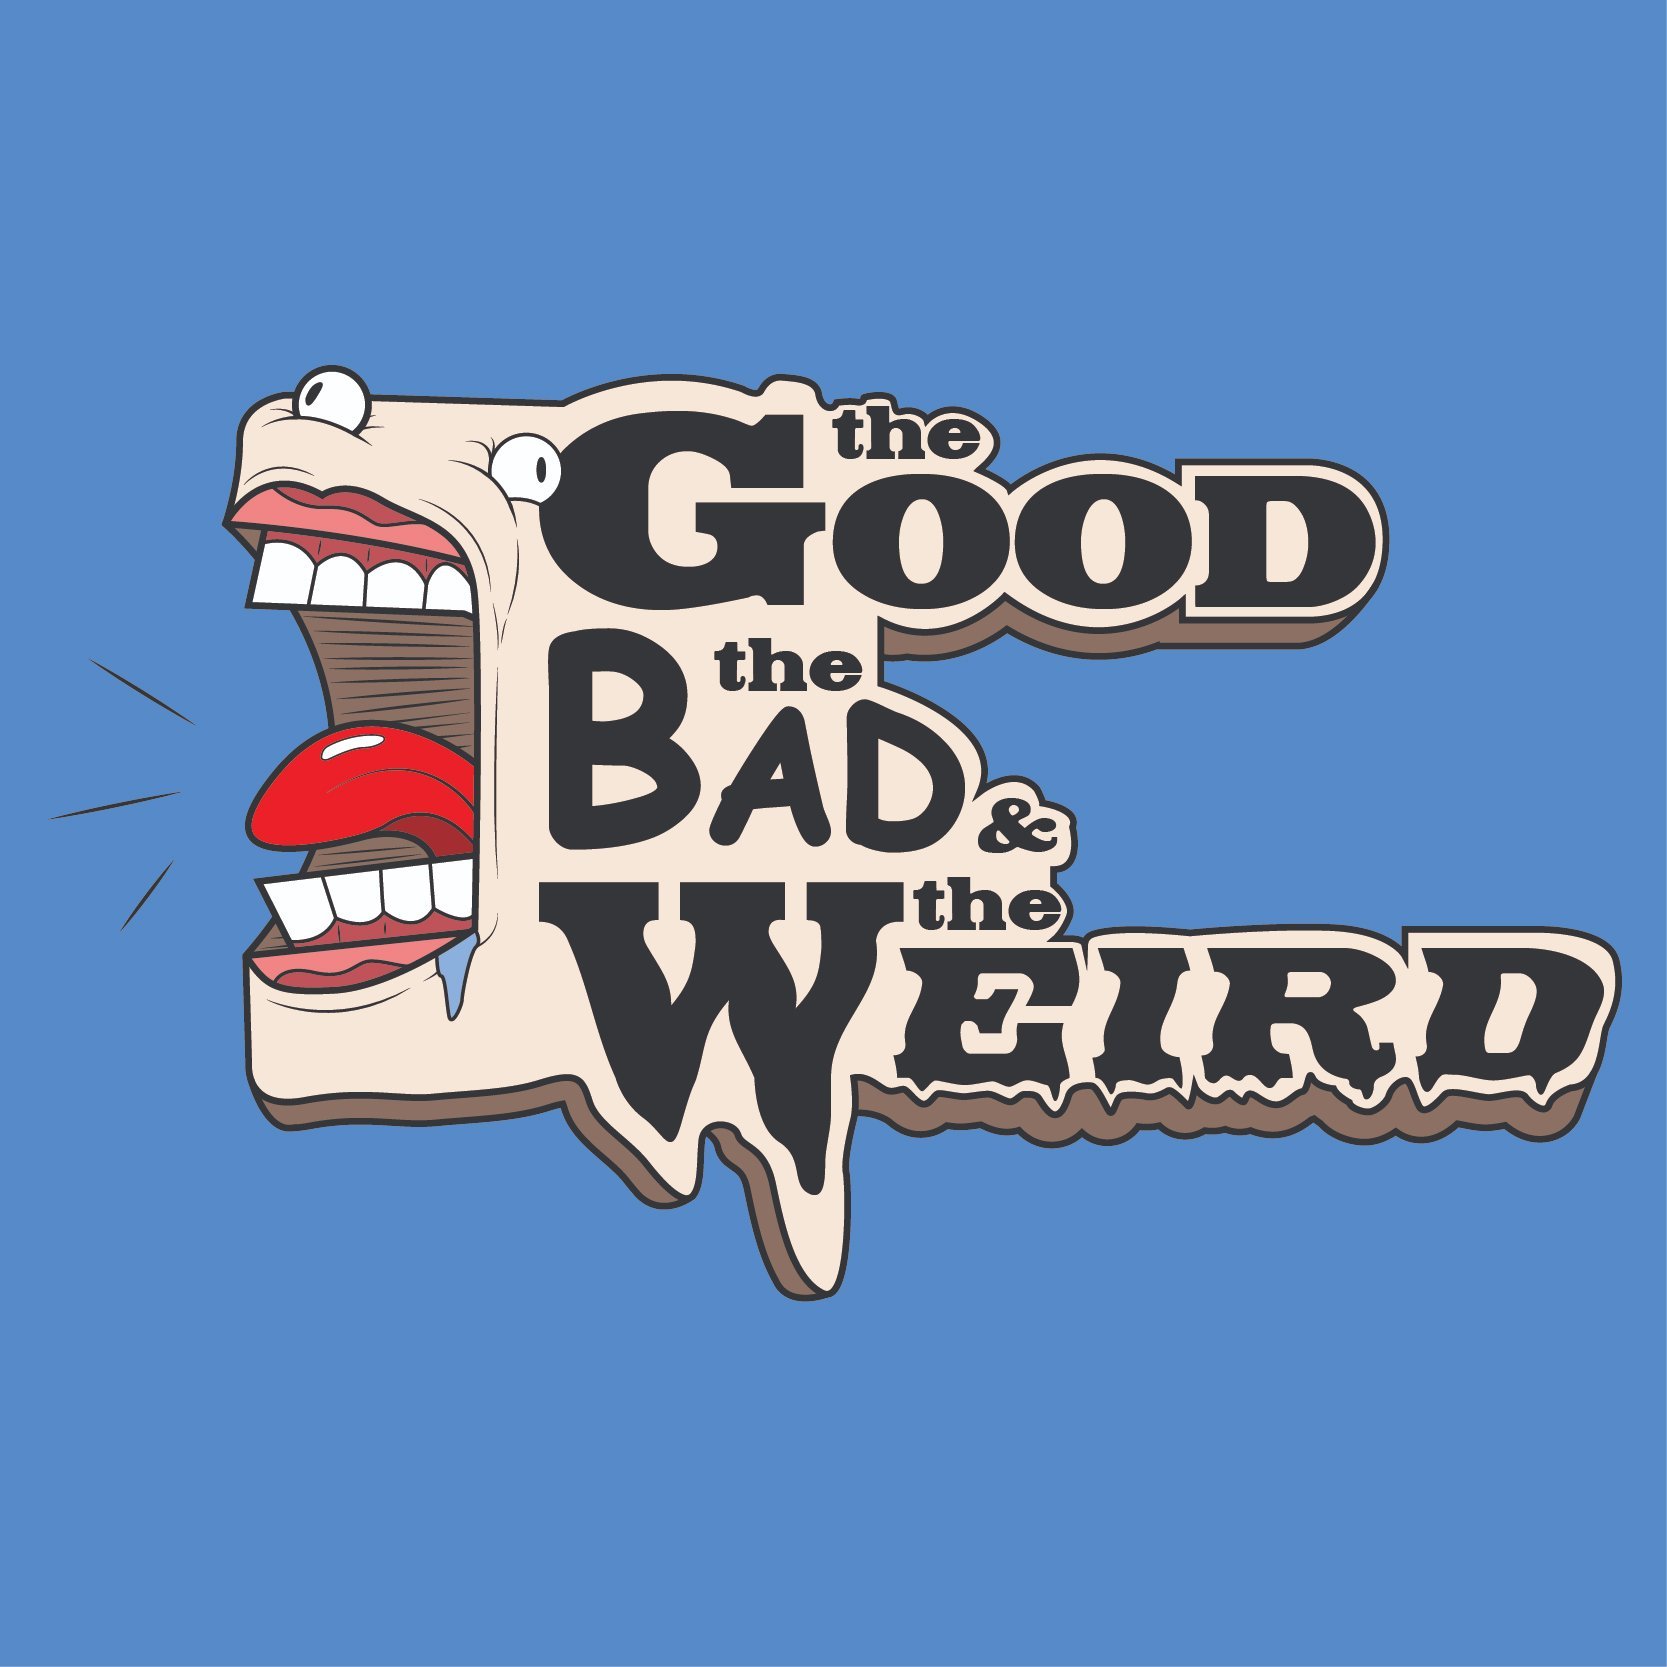 The Good, the Bad and the Weird is a bi-weekly podcast hosted by two nerds who explore the making, history and cultural impacts of film.